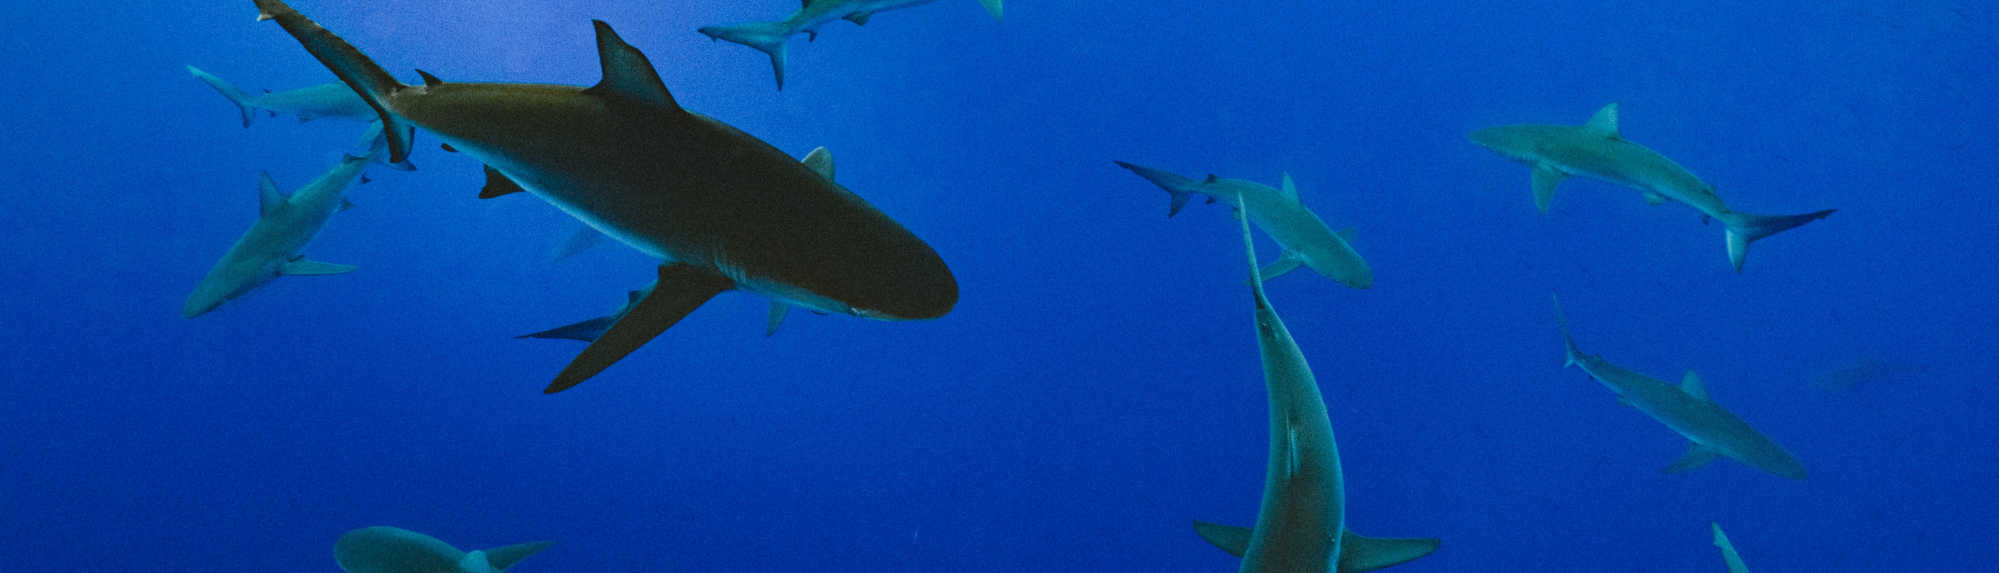 Are There Sharks in the Great Barrier Reef?